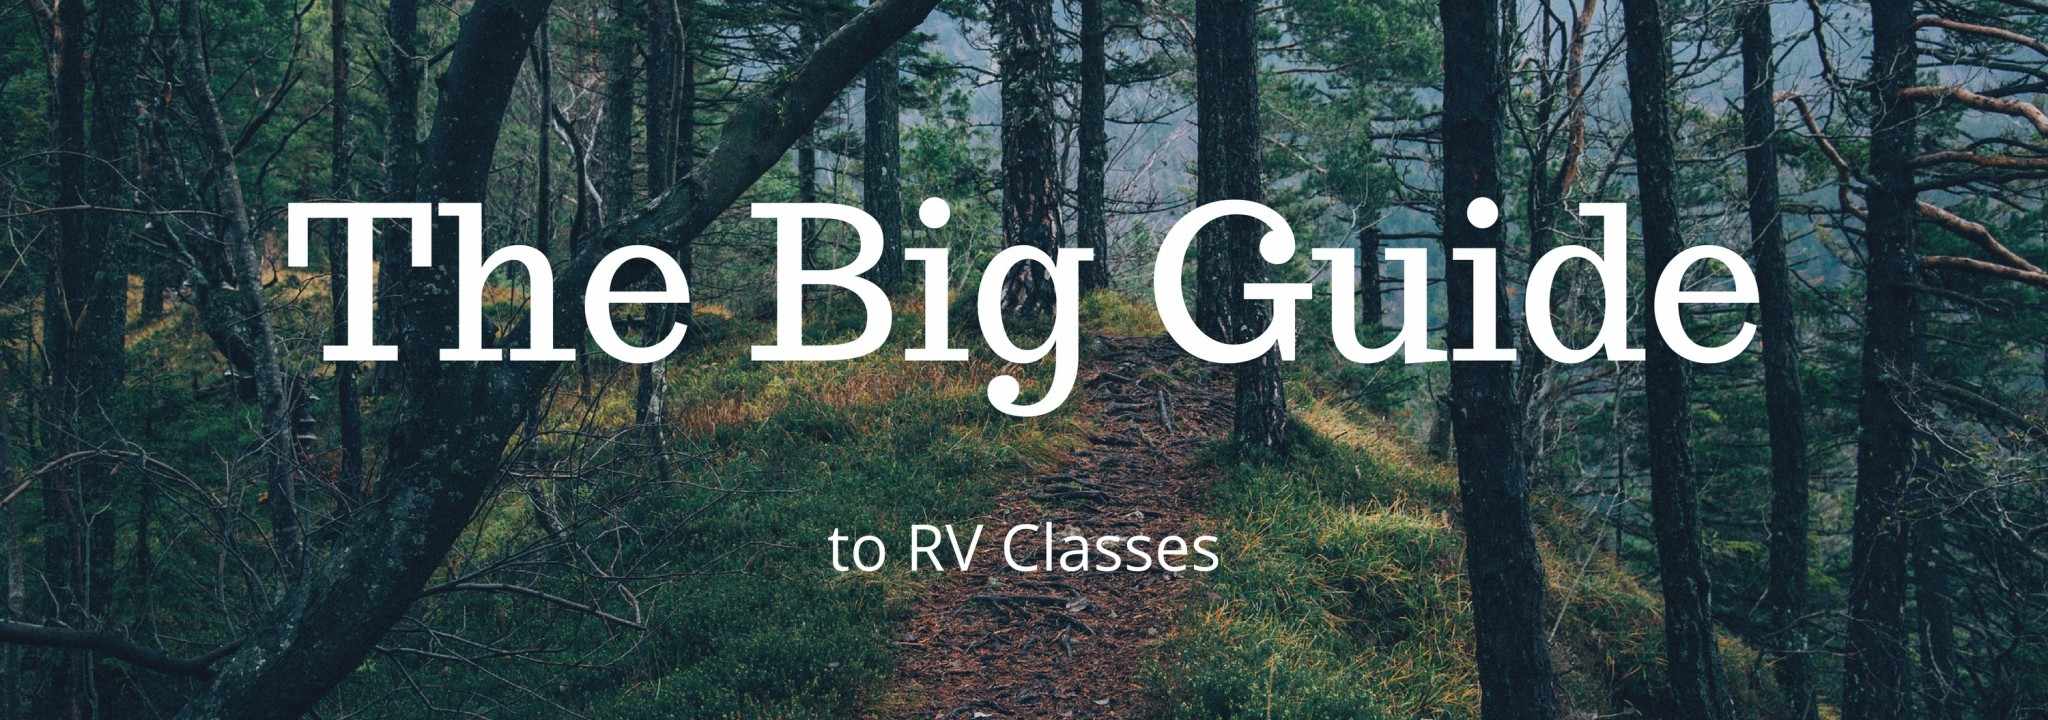 The big Outdoorsy guide to RV classes